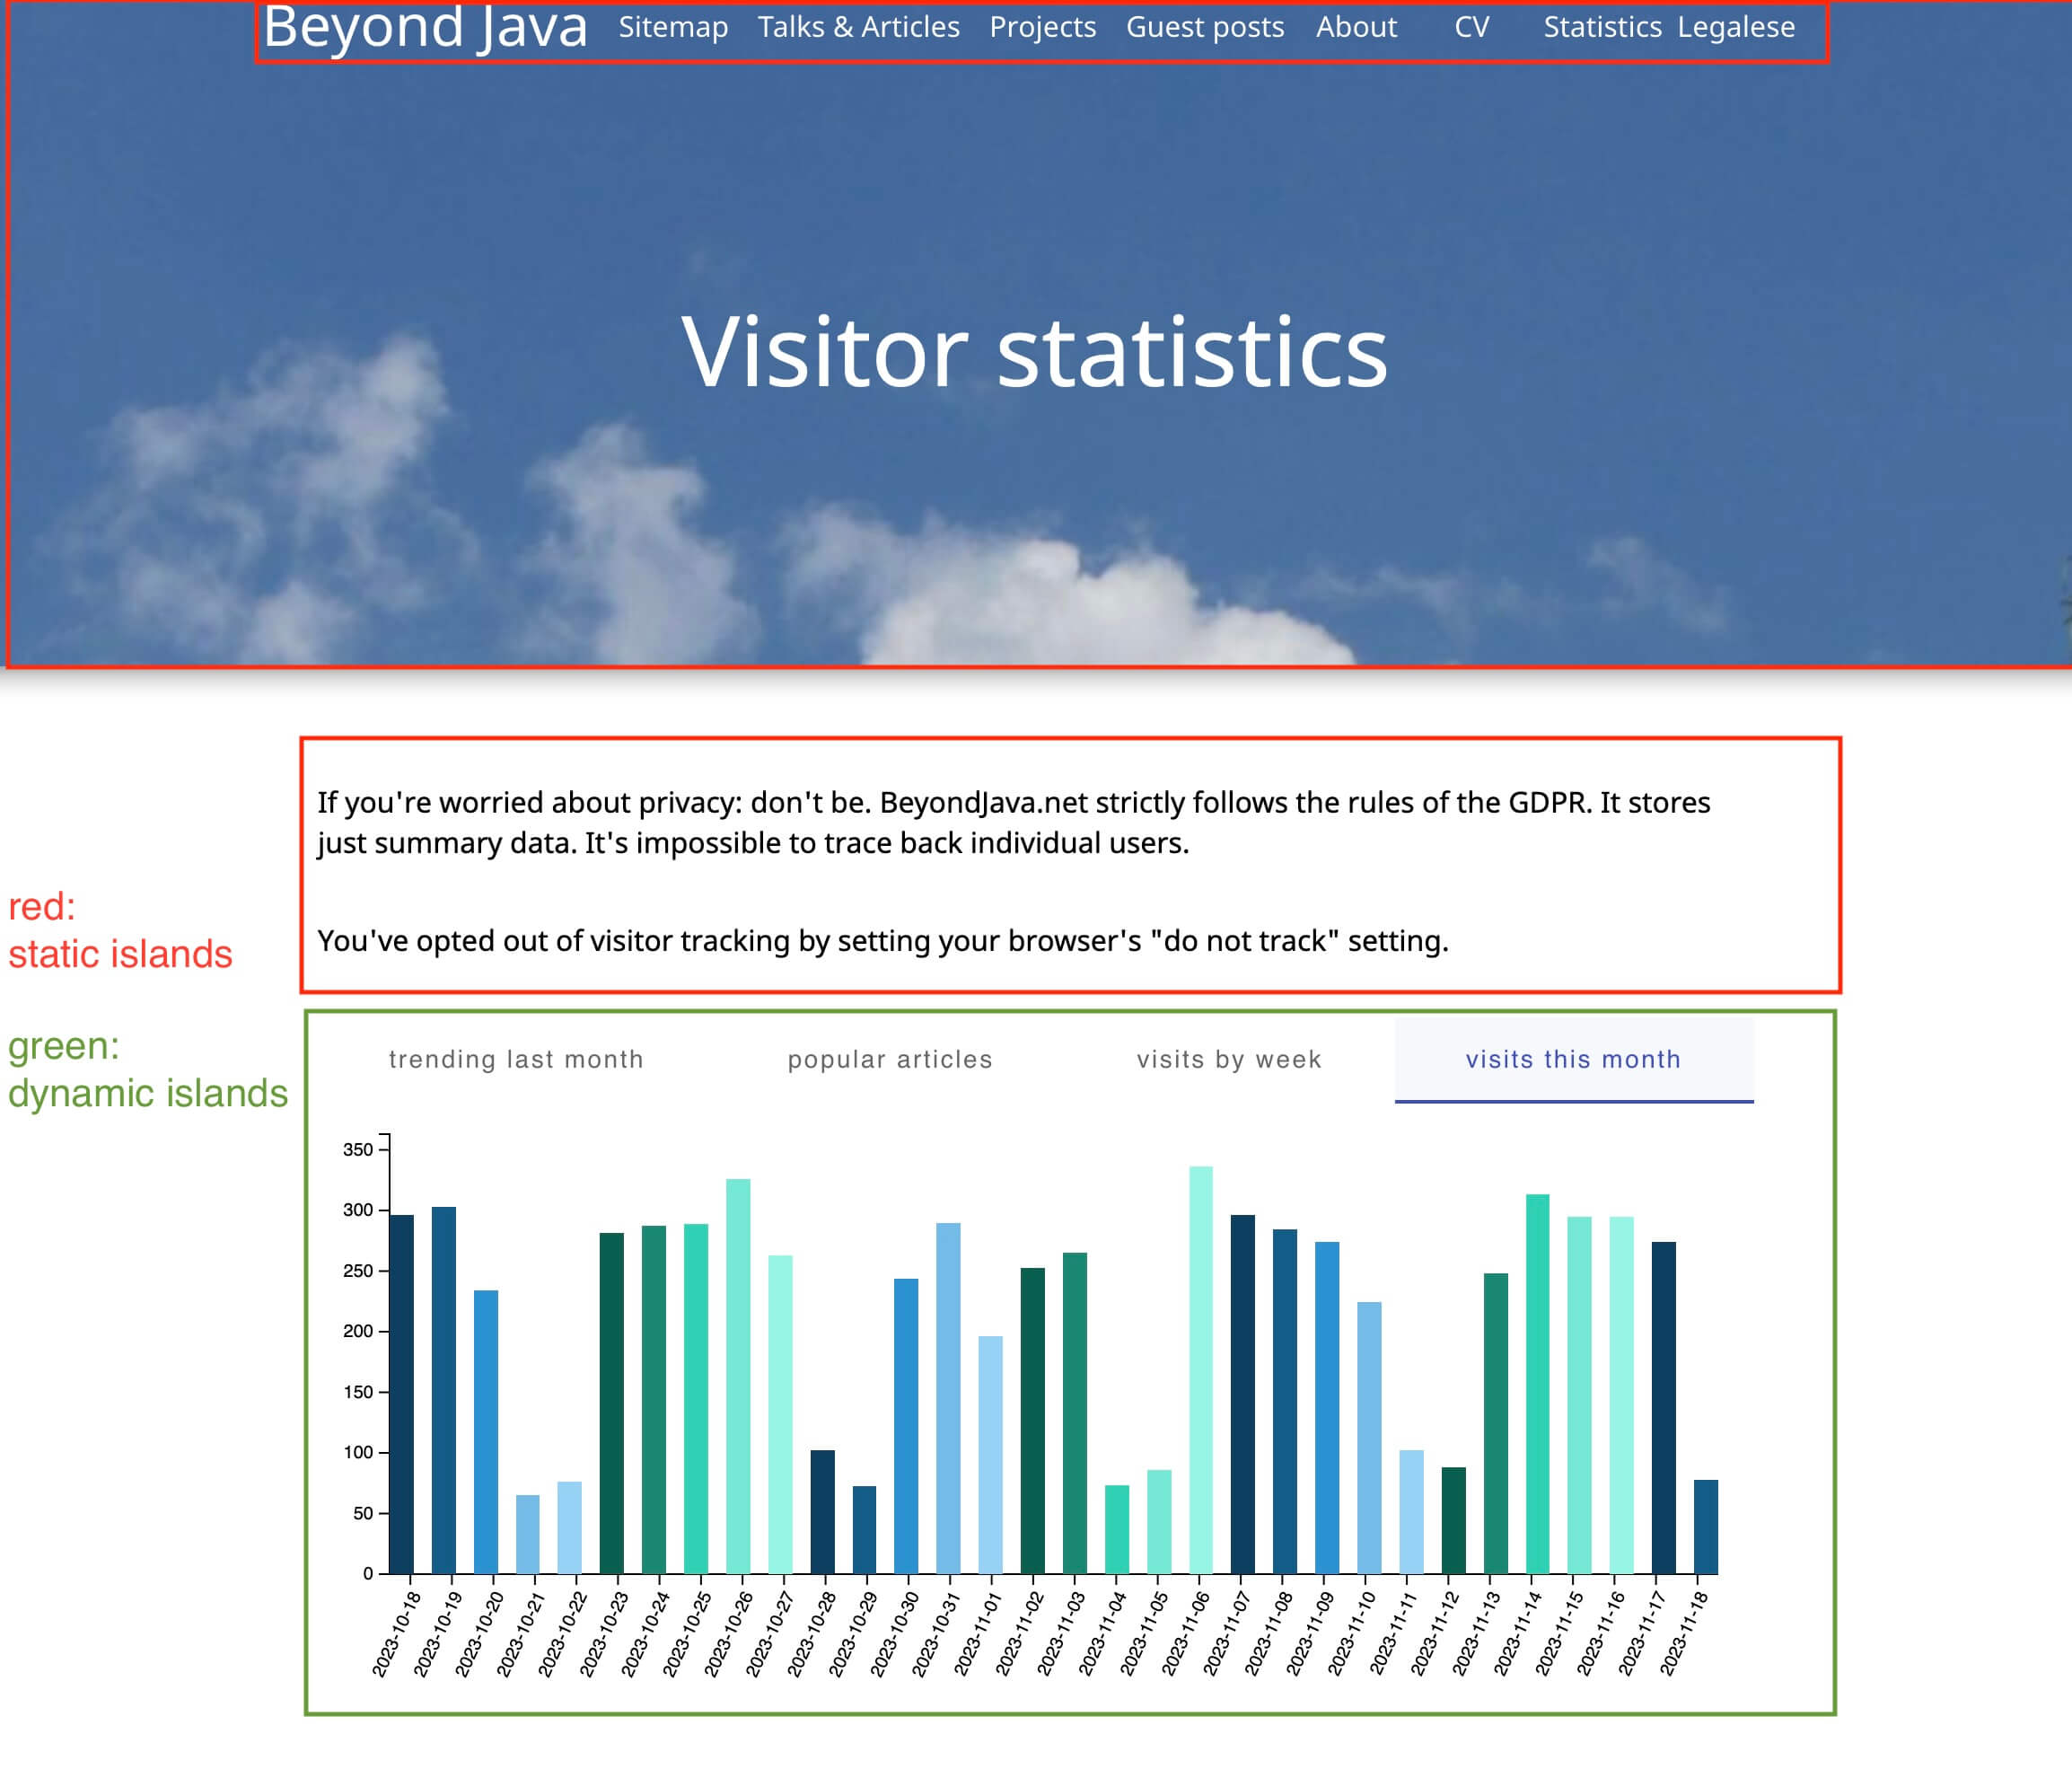 A sketch of the decomposition of the visitor statistics page of BeyondJava.net. It's explained in the text below.